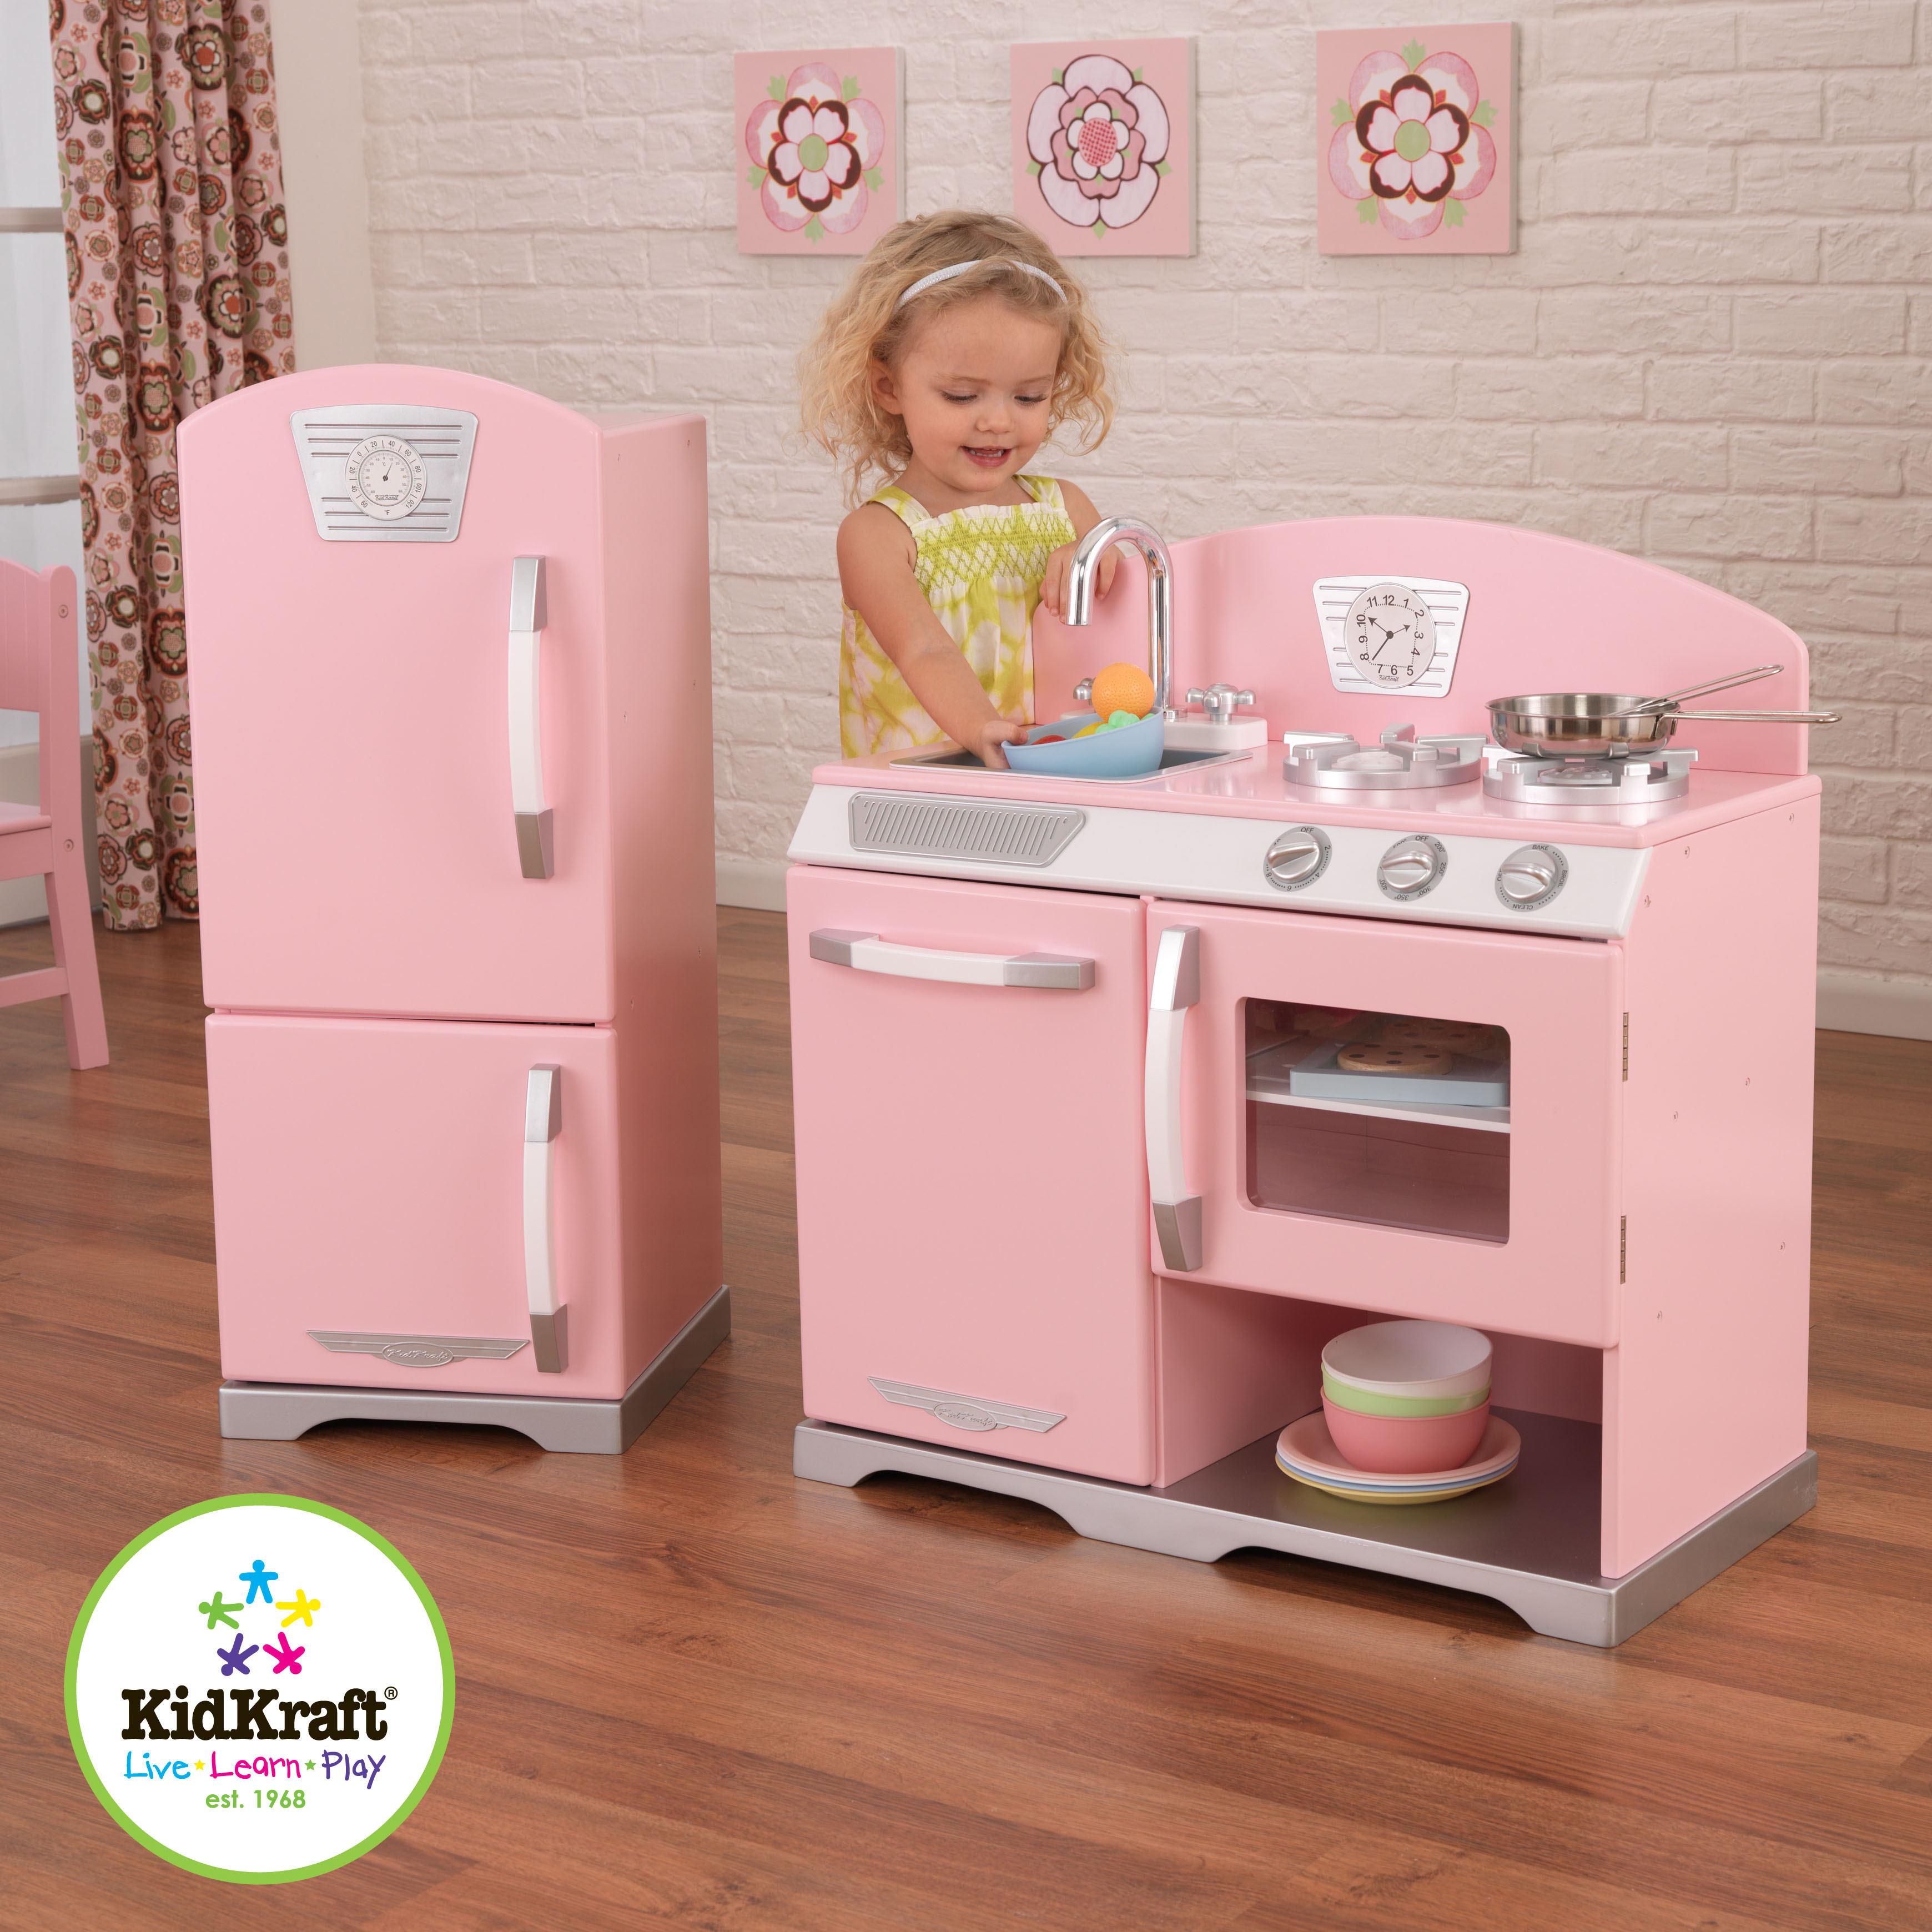 Reagan's Toy Chest Celebrates 2013 Toy Fair With Site Wide Sale on Educational Toys For Toddlers